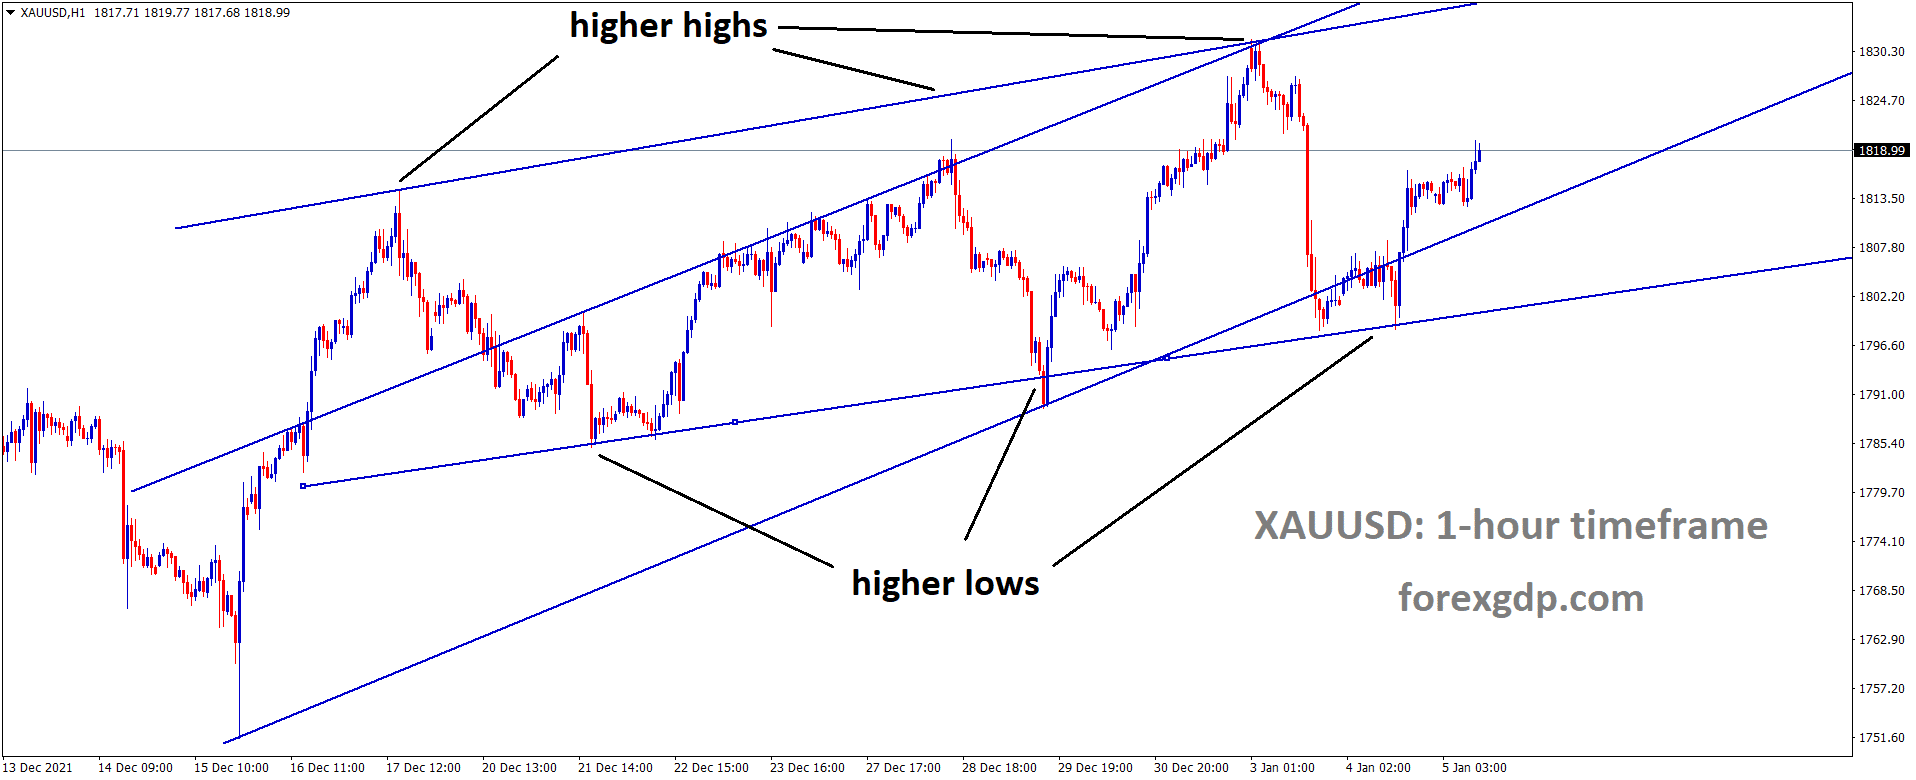 XAUUSD Gold prices are moving in an AScending channel and the Market has rebounded from the higher low